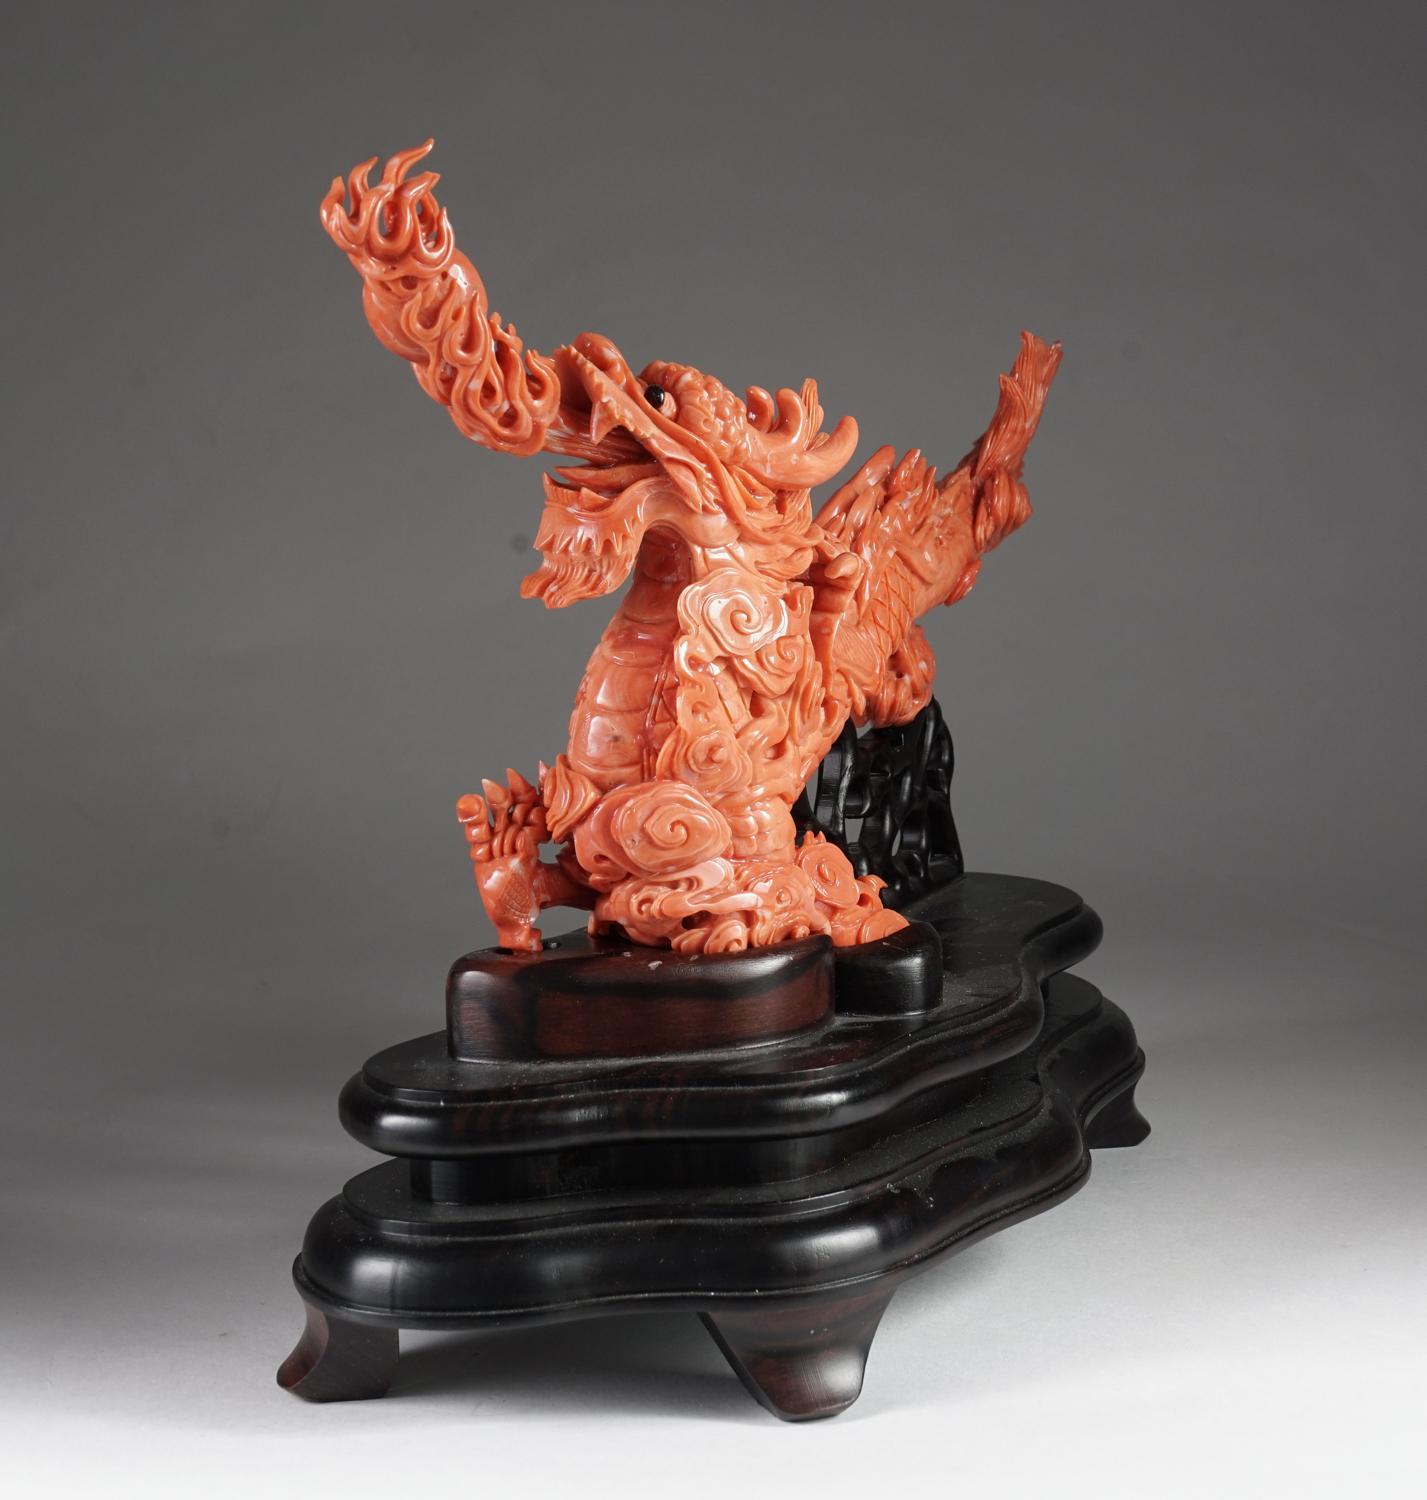 An exceptional Chinese carved coral dragon with fire, Qing dynasty.

Very finely carved. With original wooden base.

Measures: Coral: 7.5